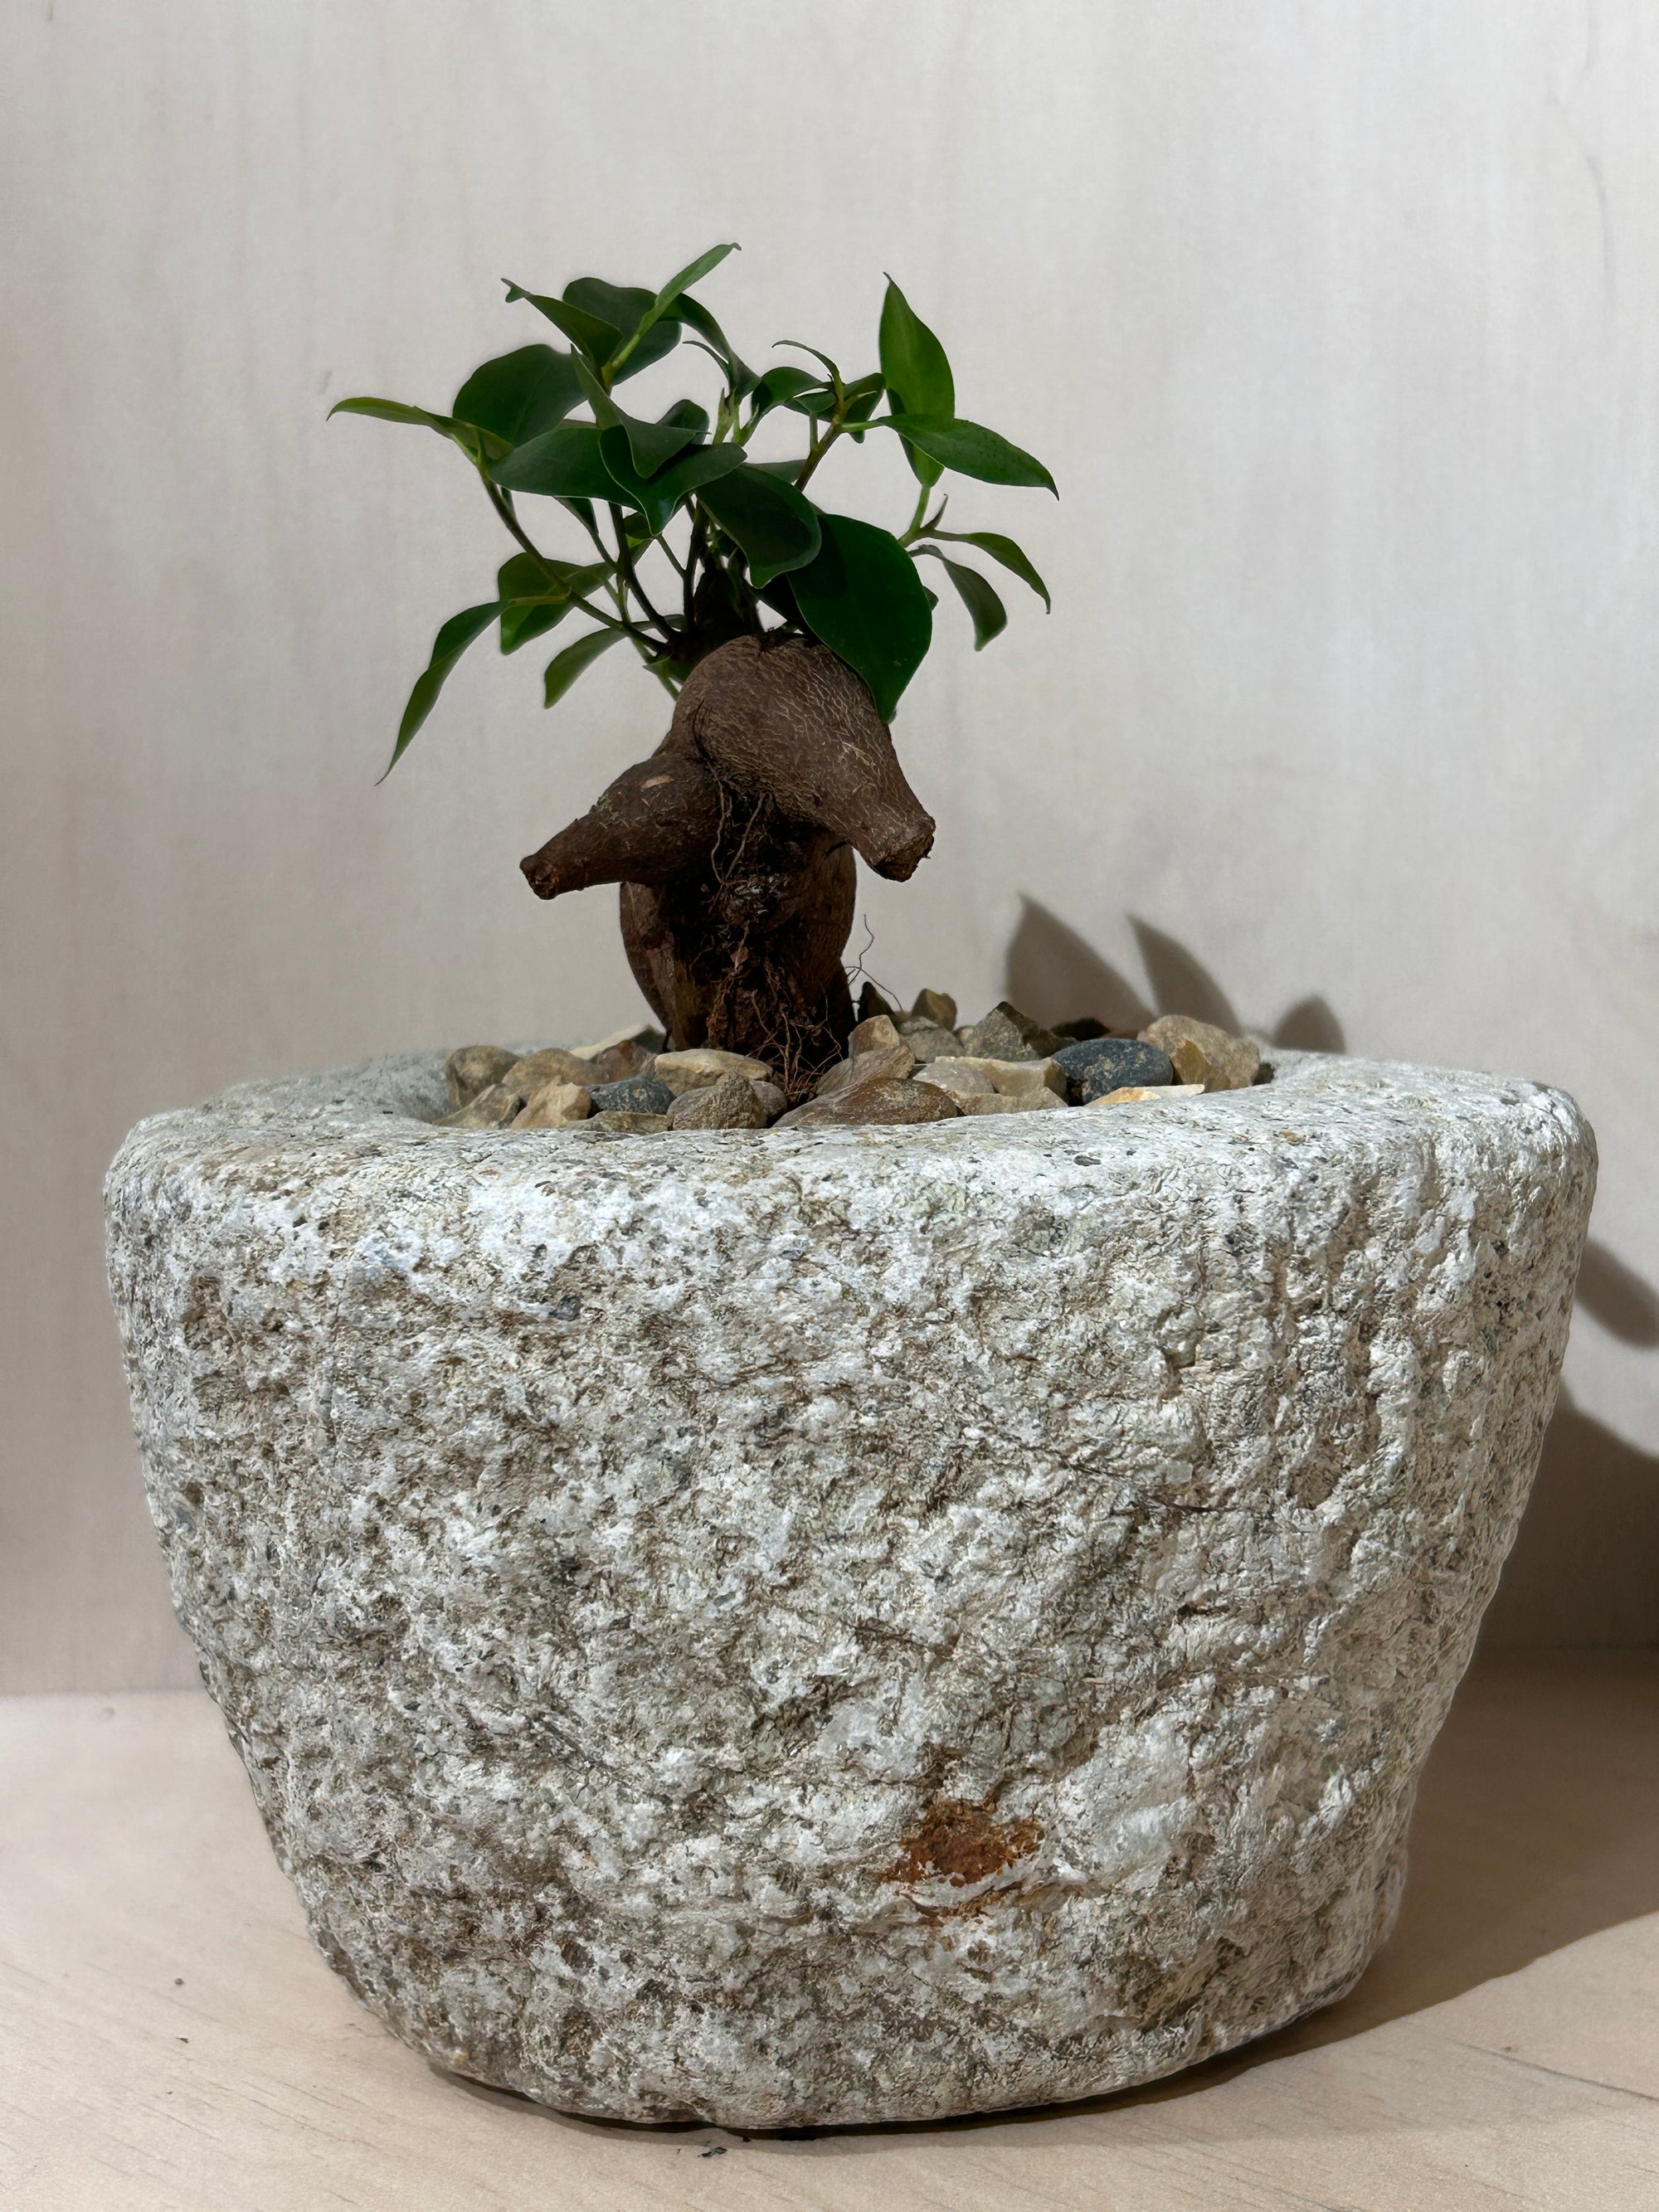 Antique Stone Mortar with Ficus Ginseng bonsai (01)